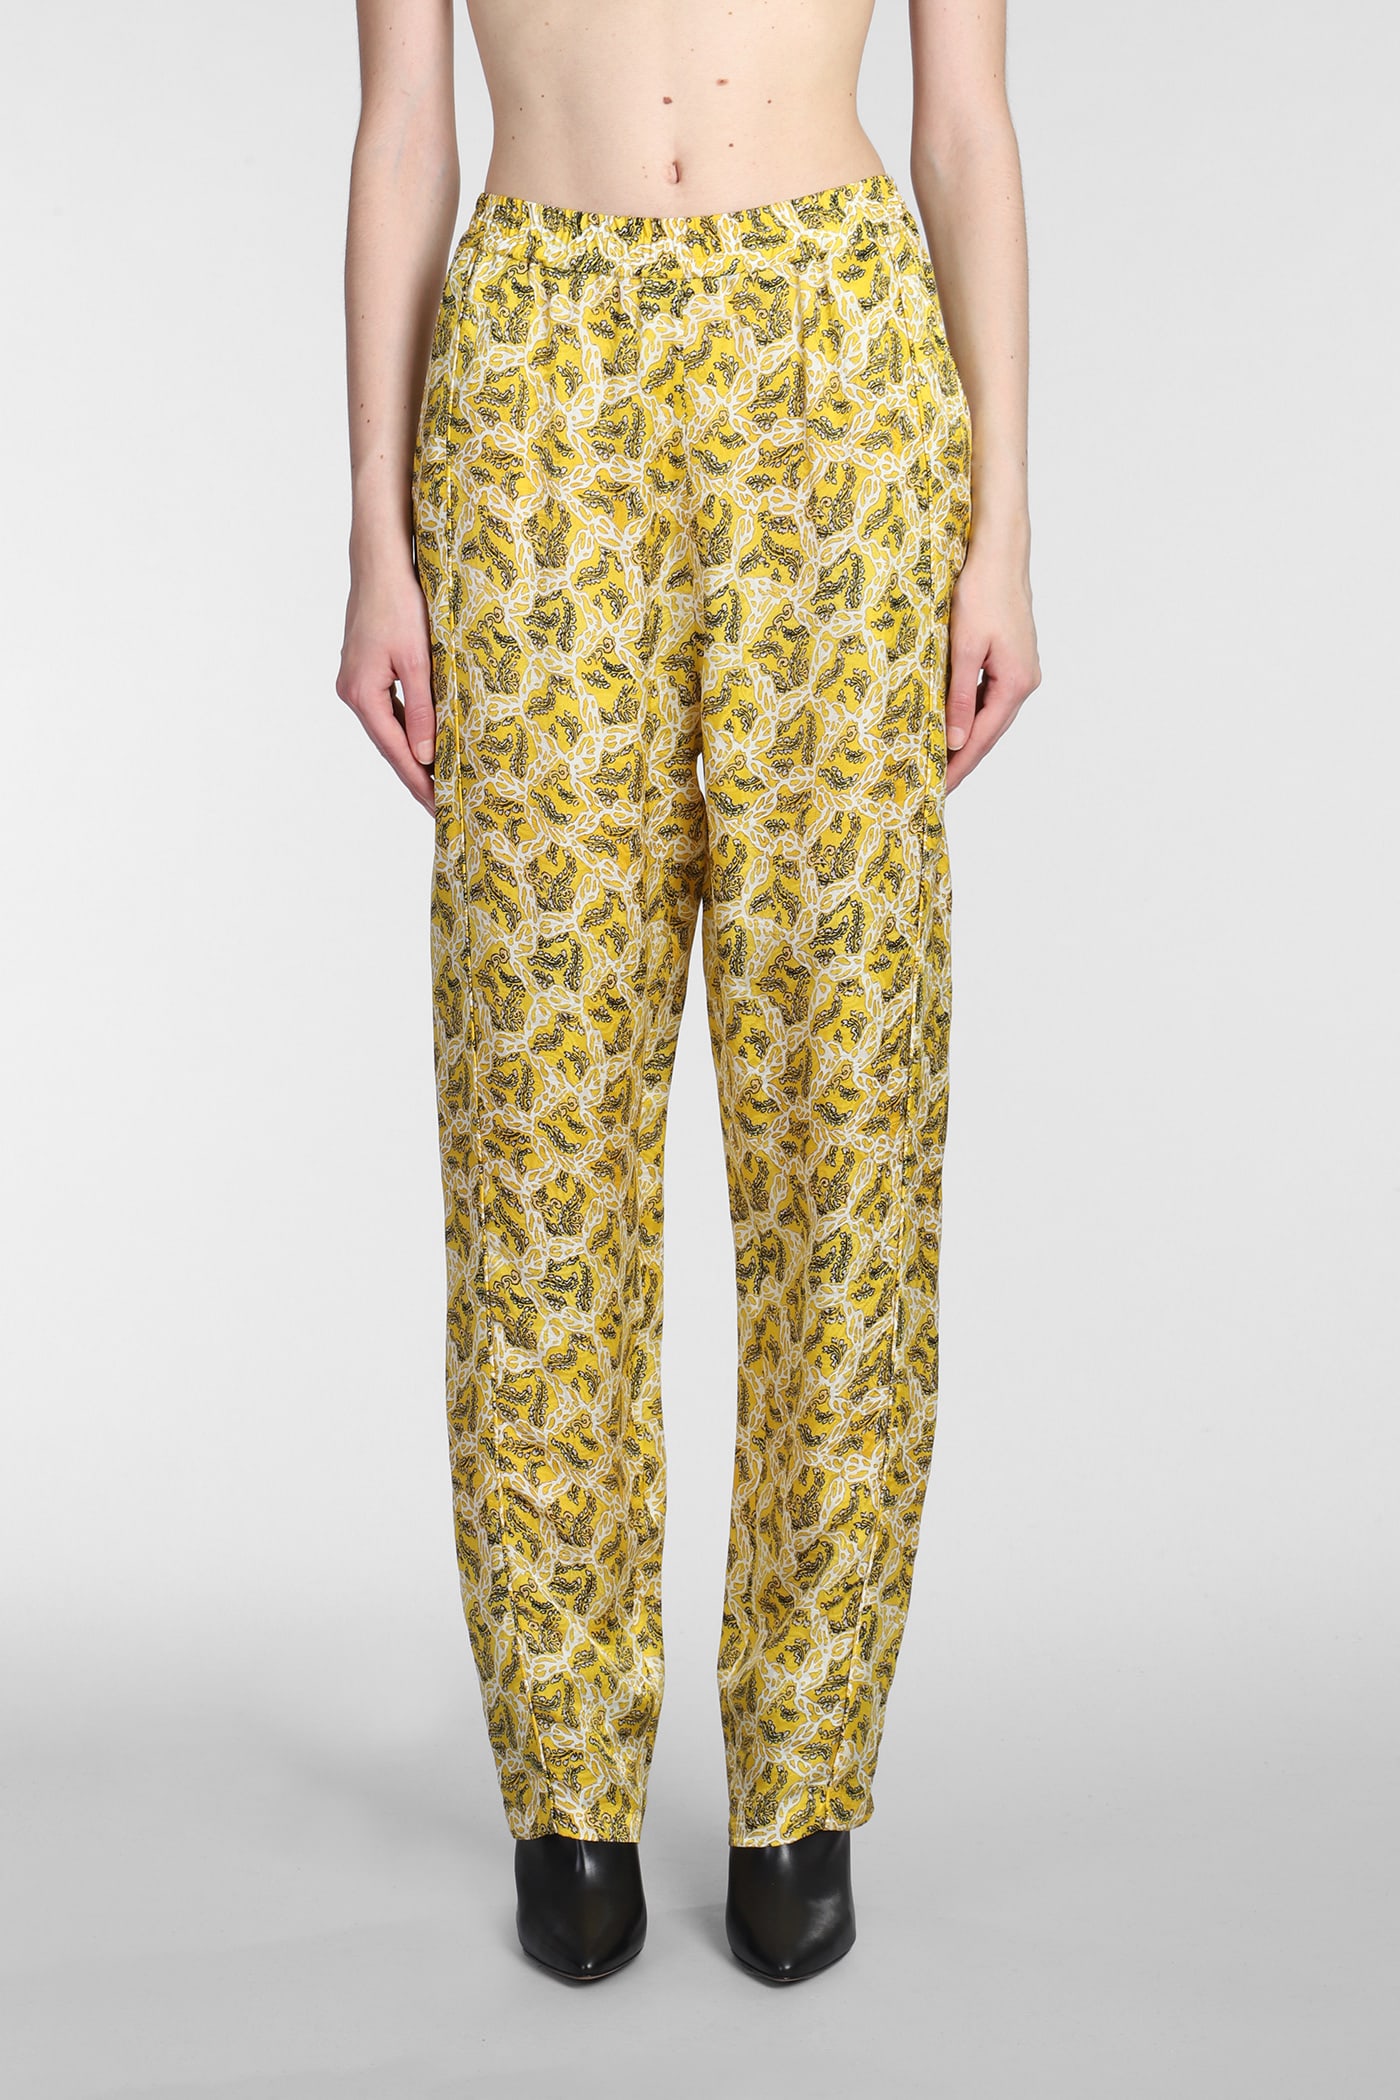 ISABEL MARANT PIERA PANTS IN YELLOW COTTON